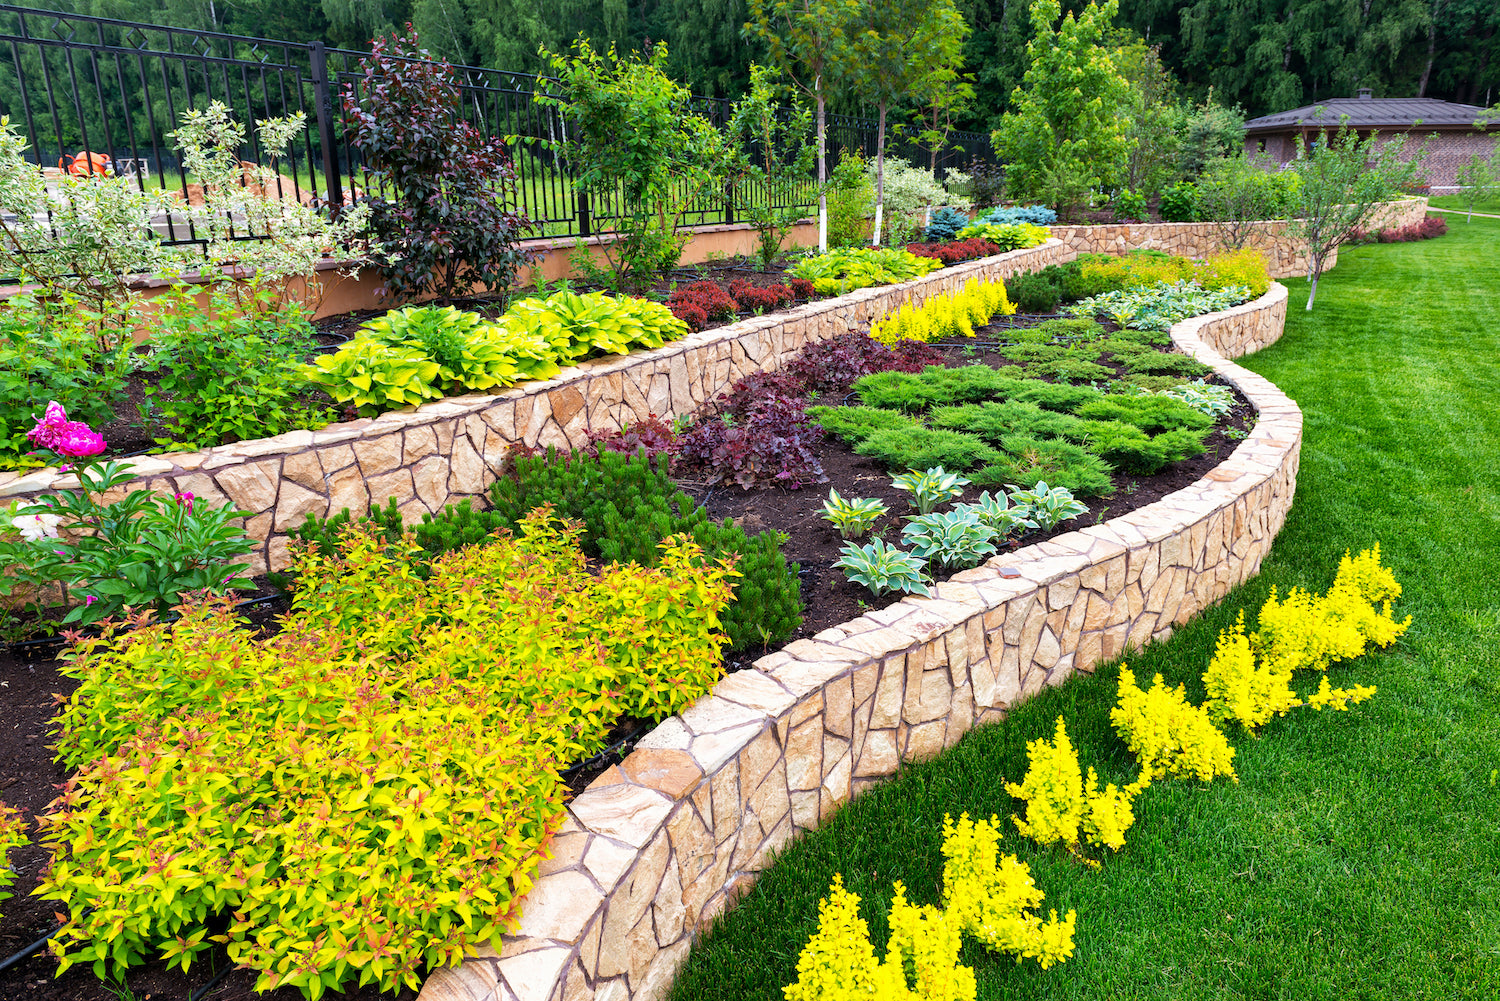 Saving Water in Your Landscape